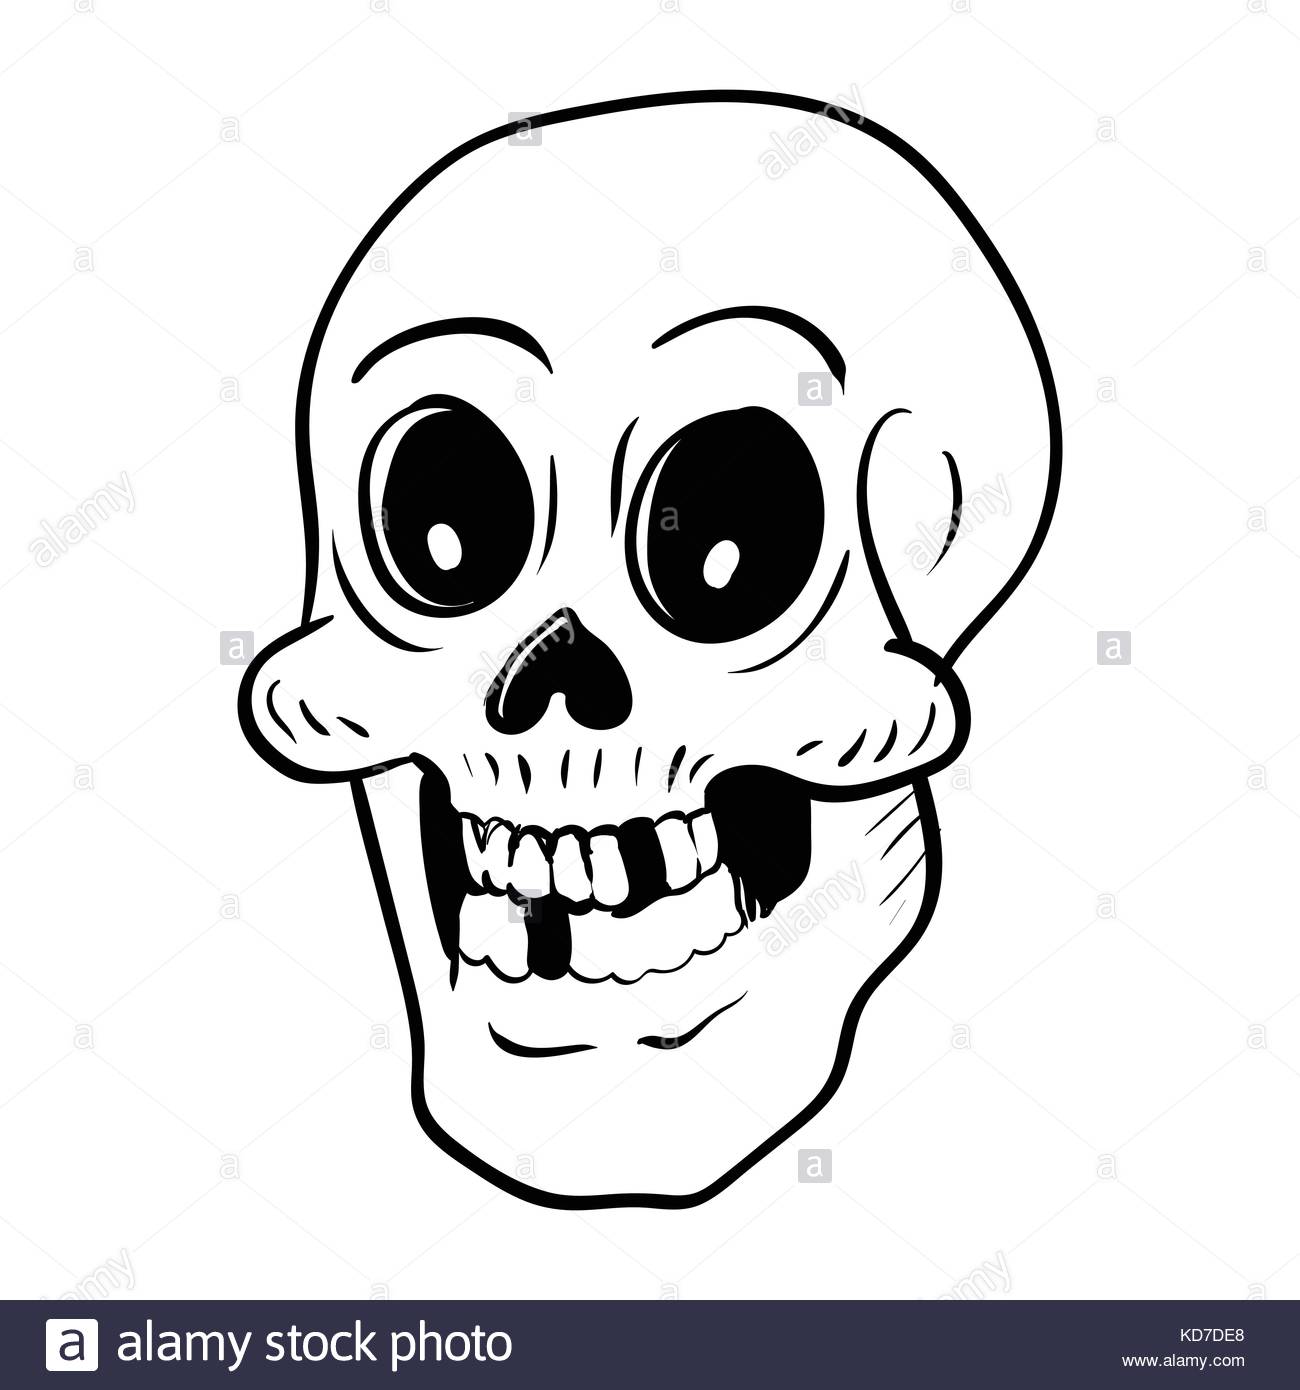 Half Skeleton Face Drawing at GetDrawings.com | Free for personal use